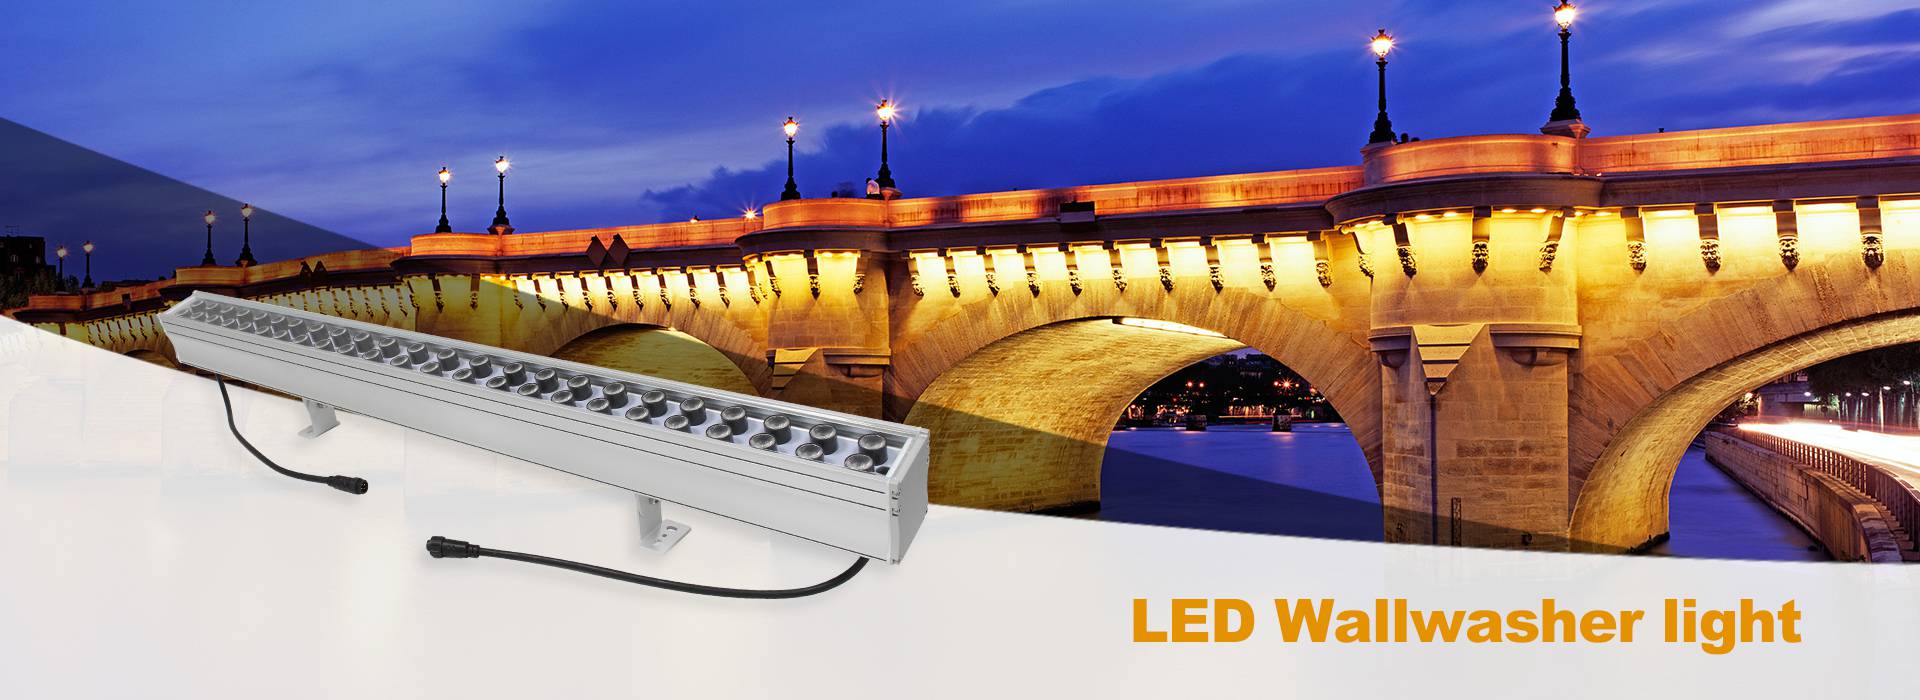 outdoor use led wall washer light 